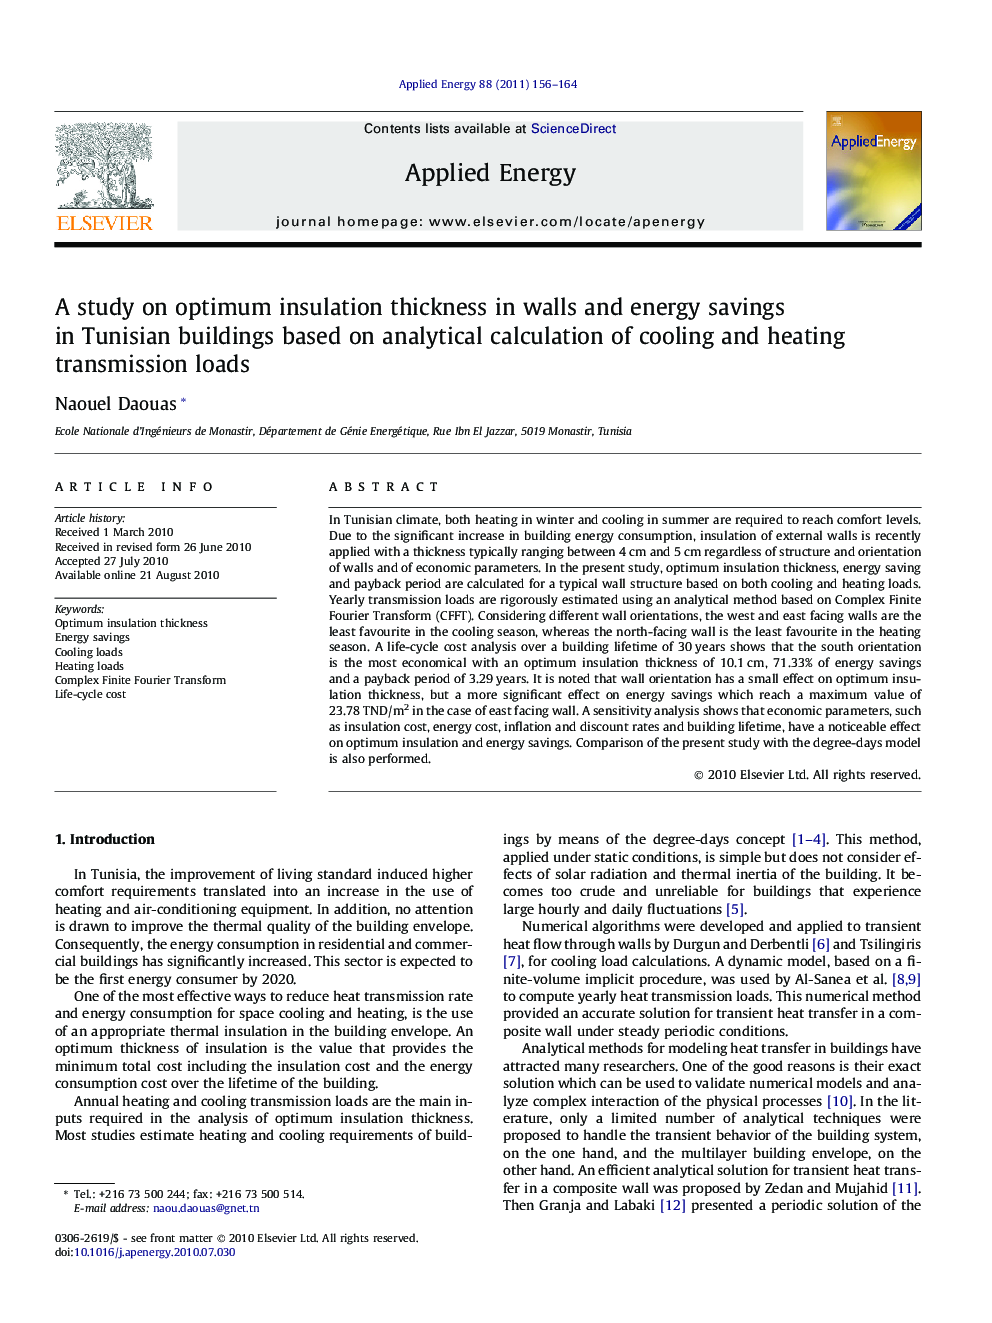 A study on optimum insulation thickness in walls and energy savings in Tunisian buildings based on analytical calculation of cooling and heating transmission loads